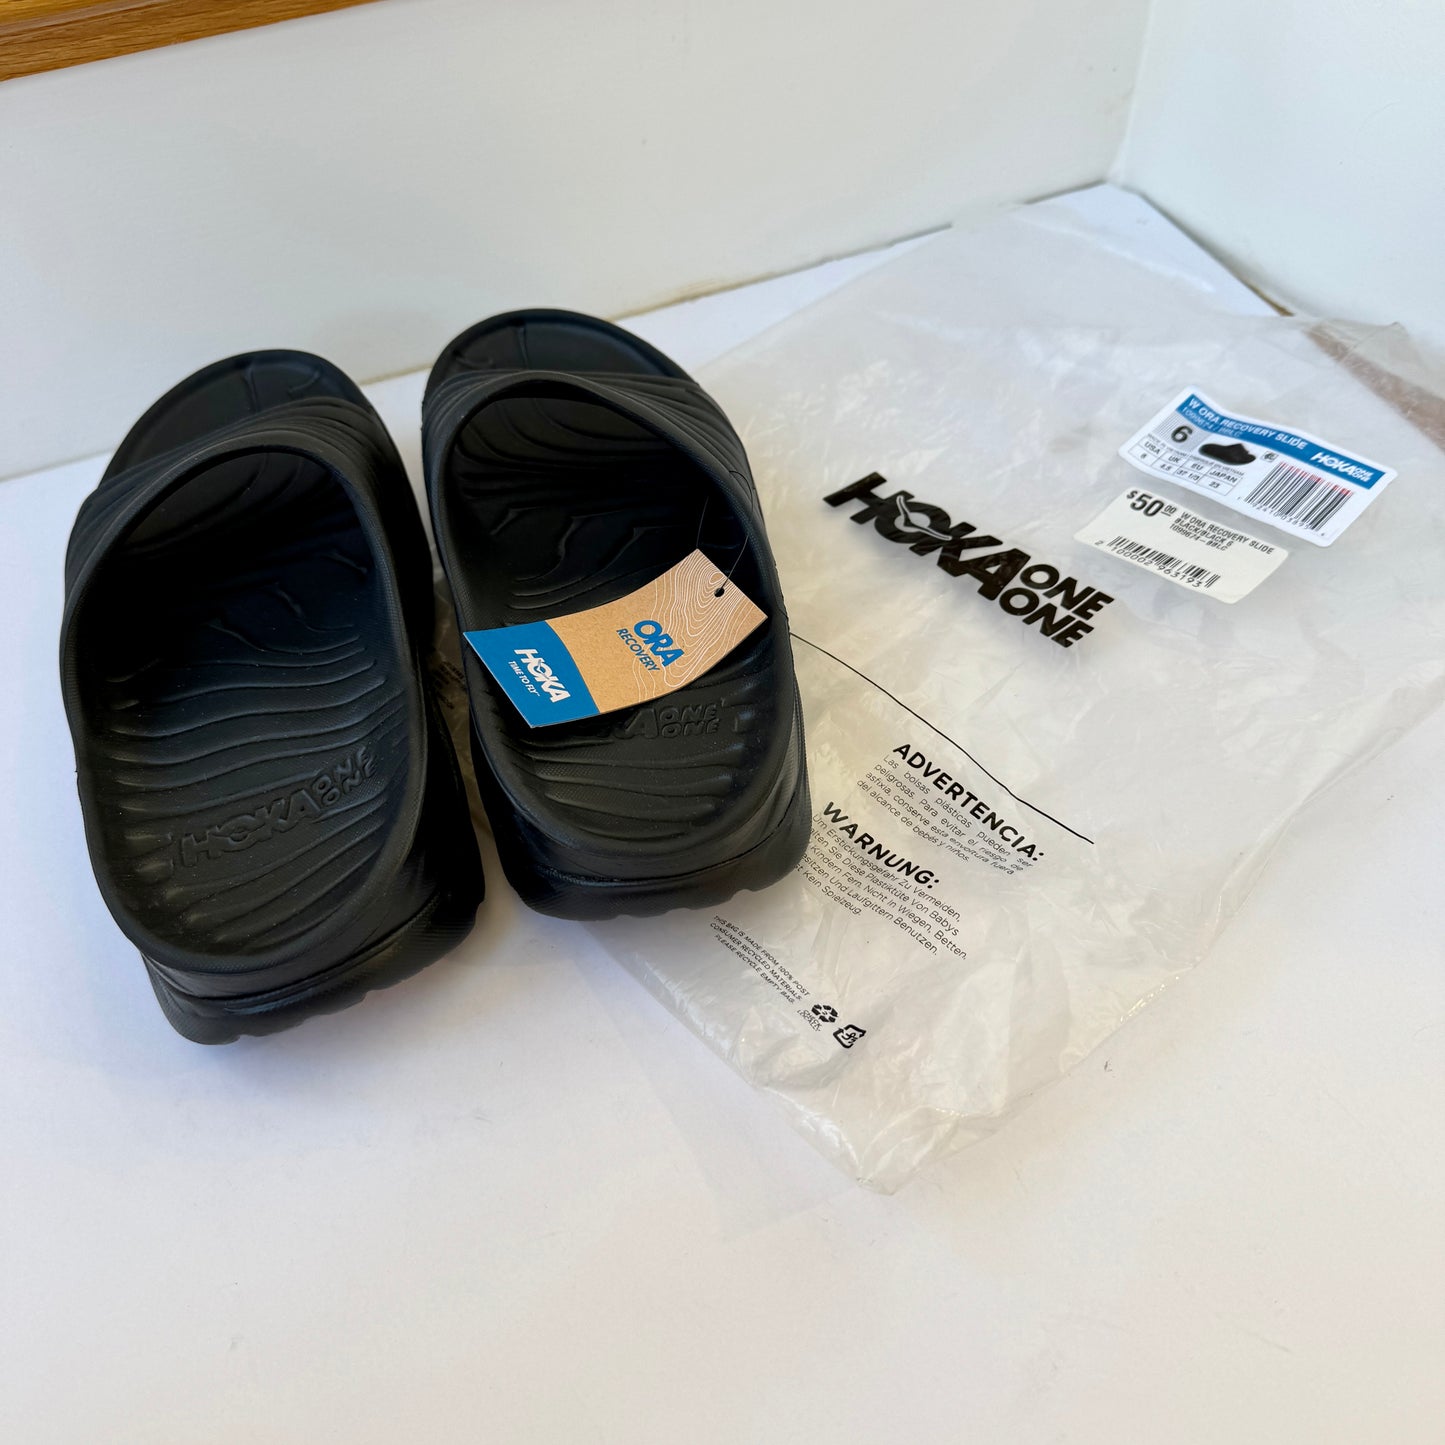 Hoka Ora Slides Women’s Recovery Sandals in all black , original style / version